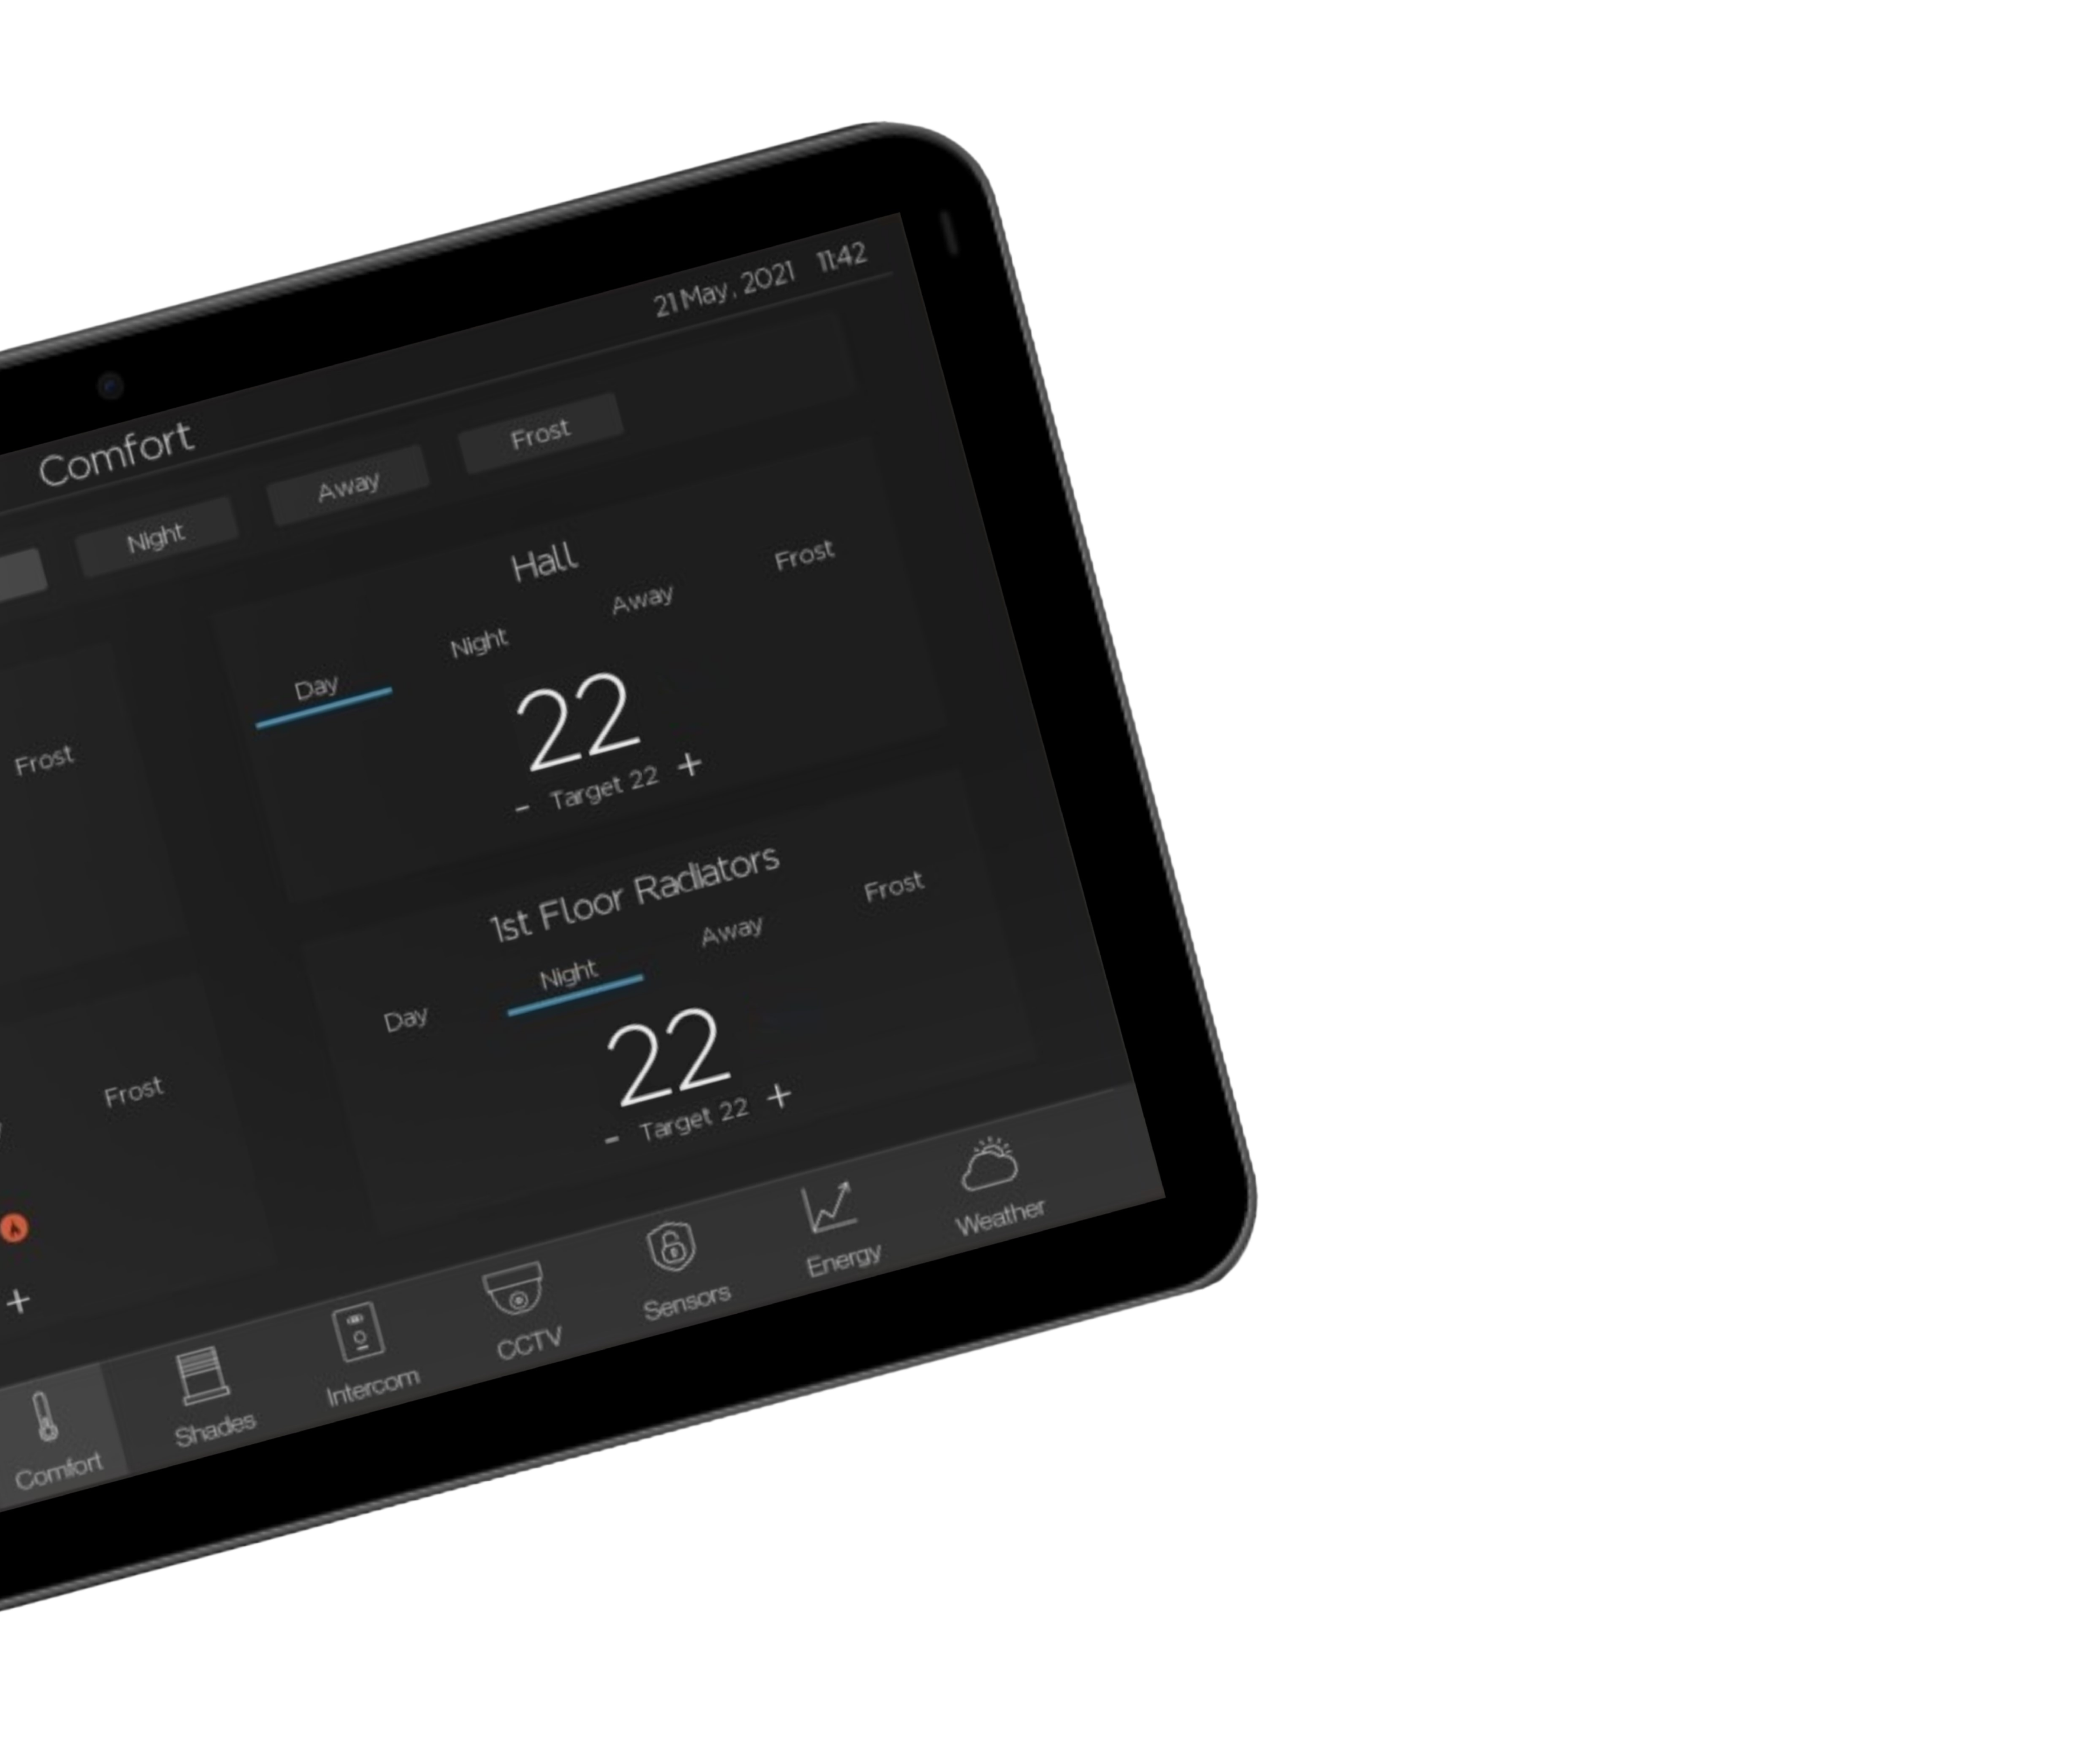 Tablet screen displaying room control settings for smart home automation.